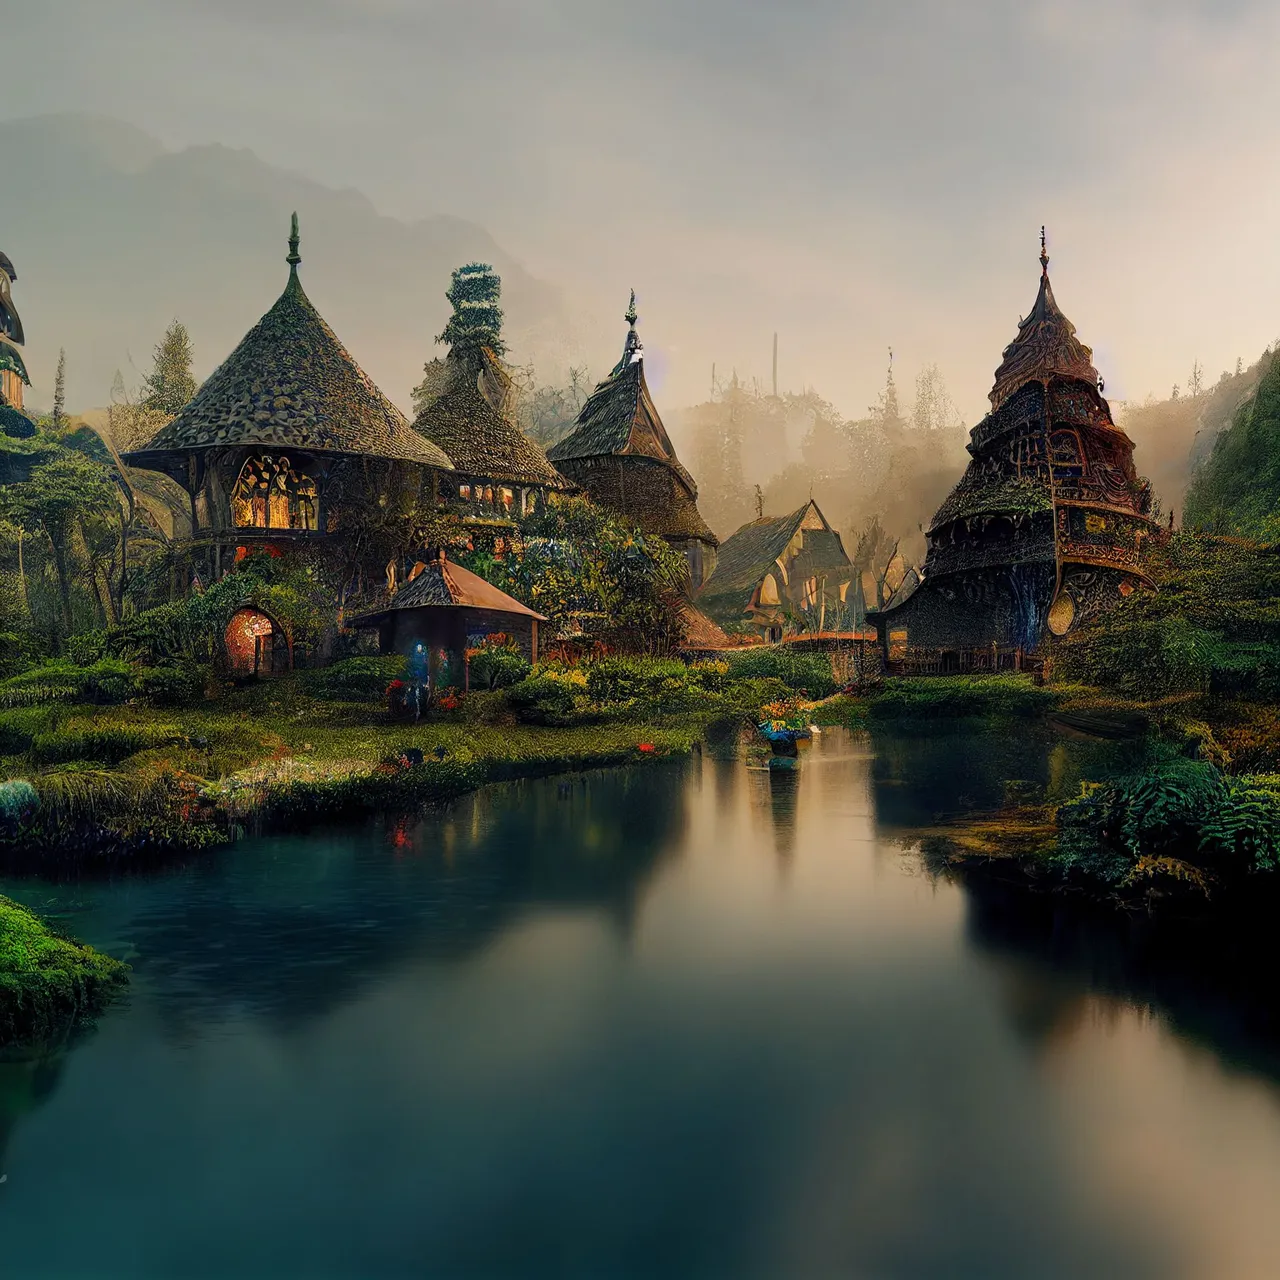 Ed_Privat_An_Elvish_village_with_a_river_and_trees_mythical_dre_7fcead17-8252-45bc-bafa-e642dc4e728e (1).png